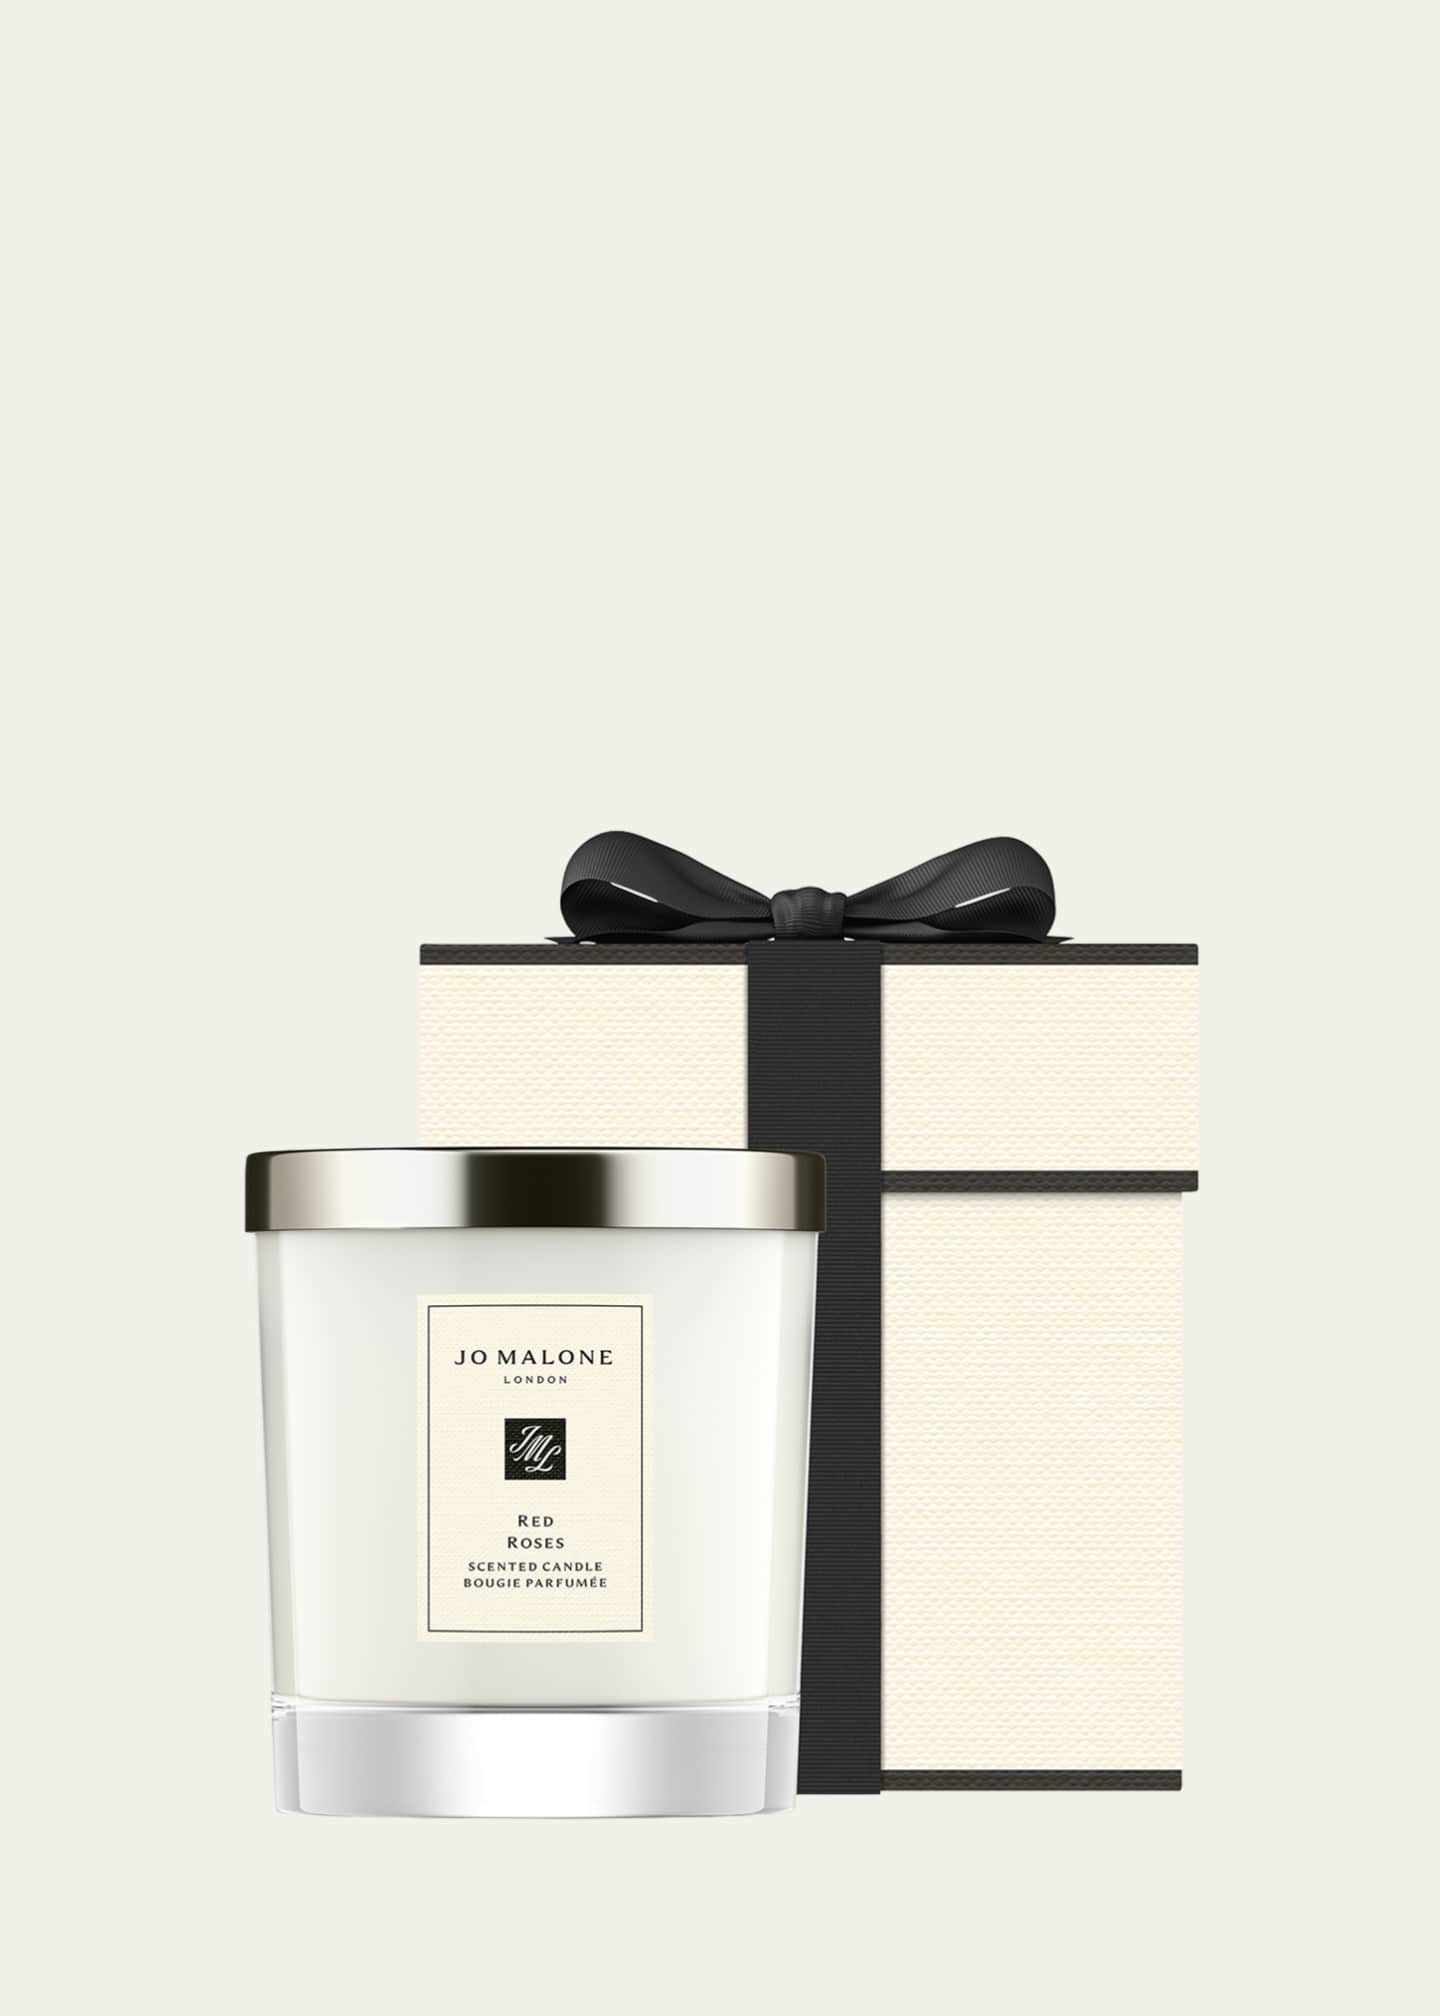 Jo Malone London 7 oz. Red Roses Home Candle Image 1 of 5